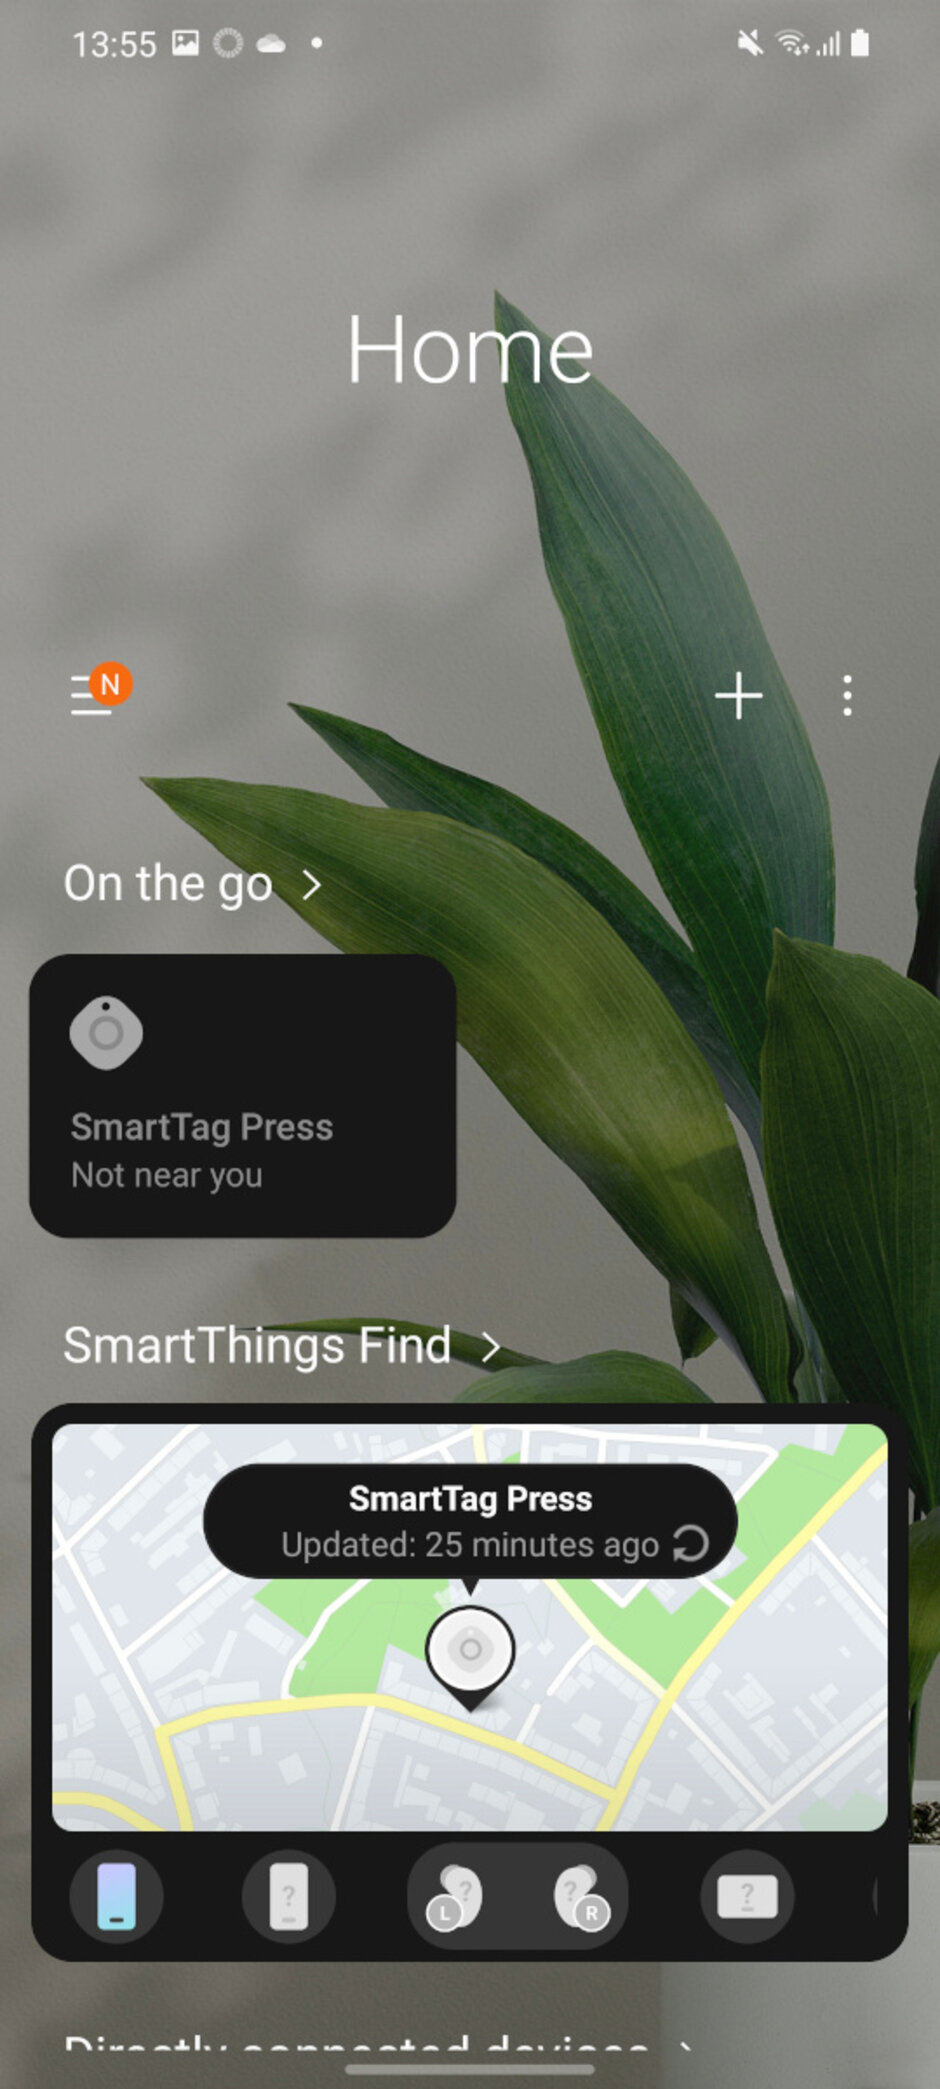 Samsung Galaxy SmartTag review: The "Where's my thing?" lifesaver